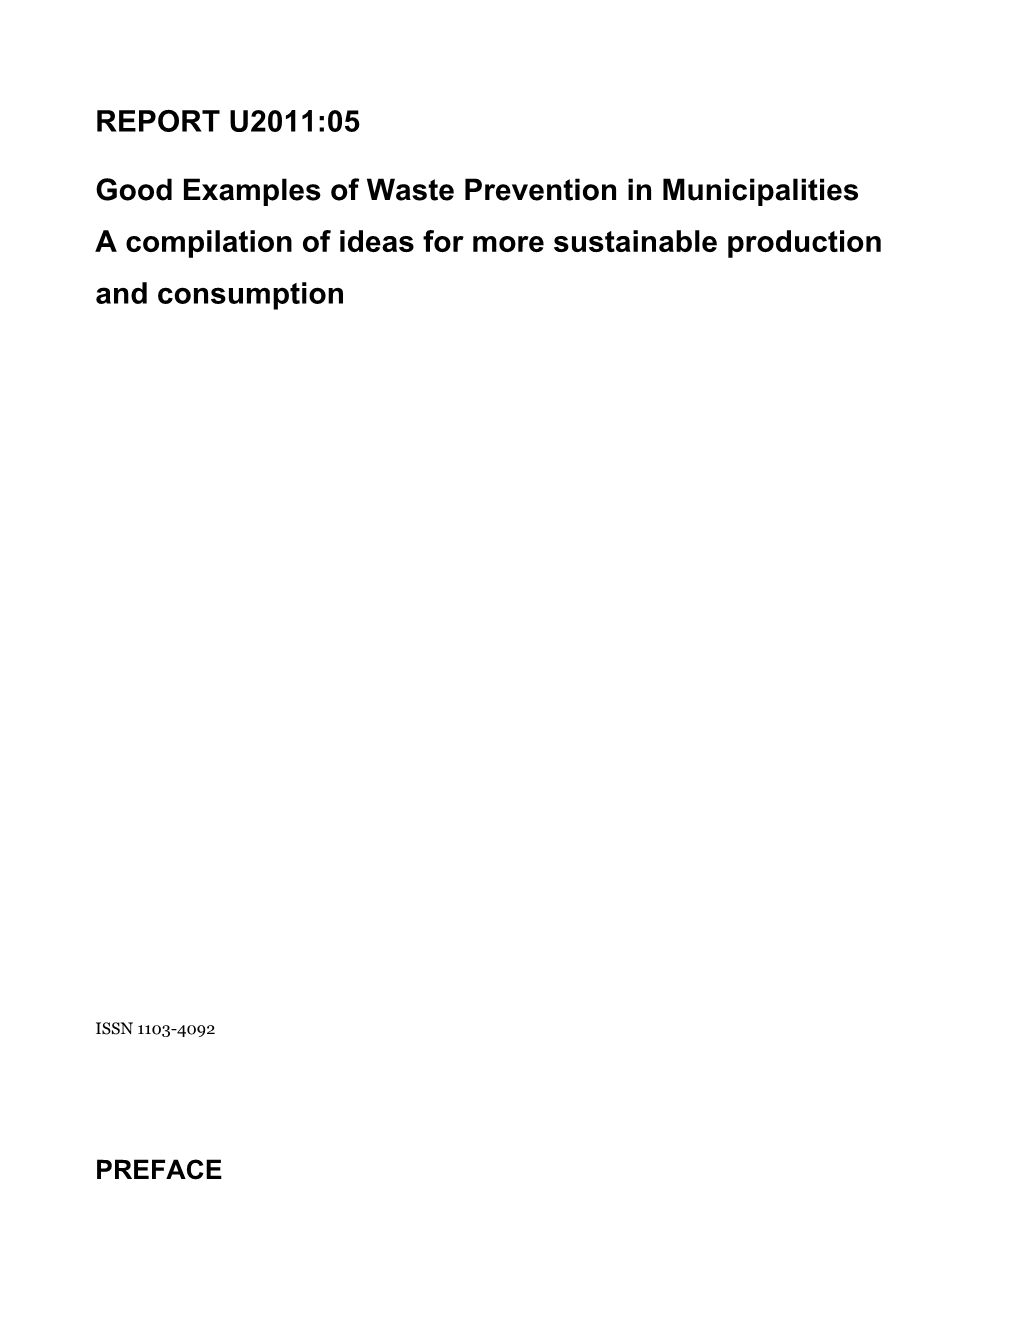 Good Examples of Waste Prevention in Municipalities a Compilation of Ideas for More Sustainable